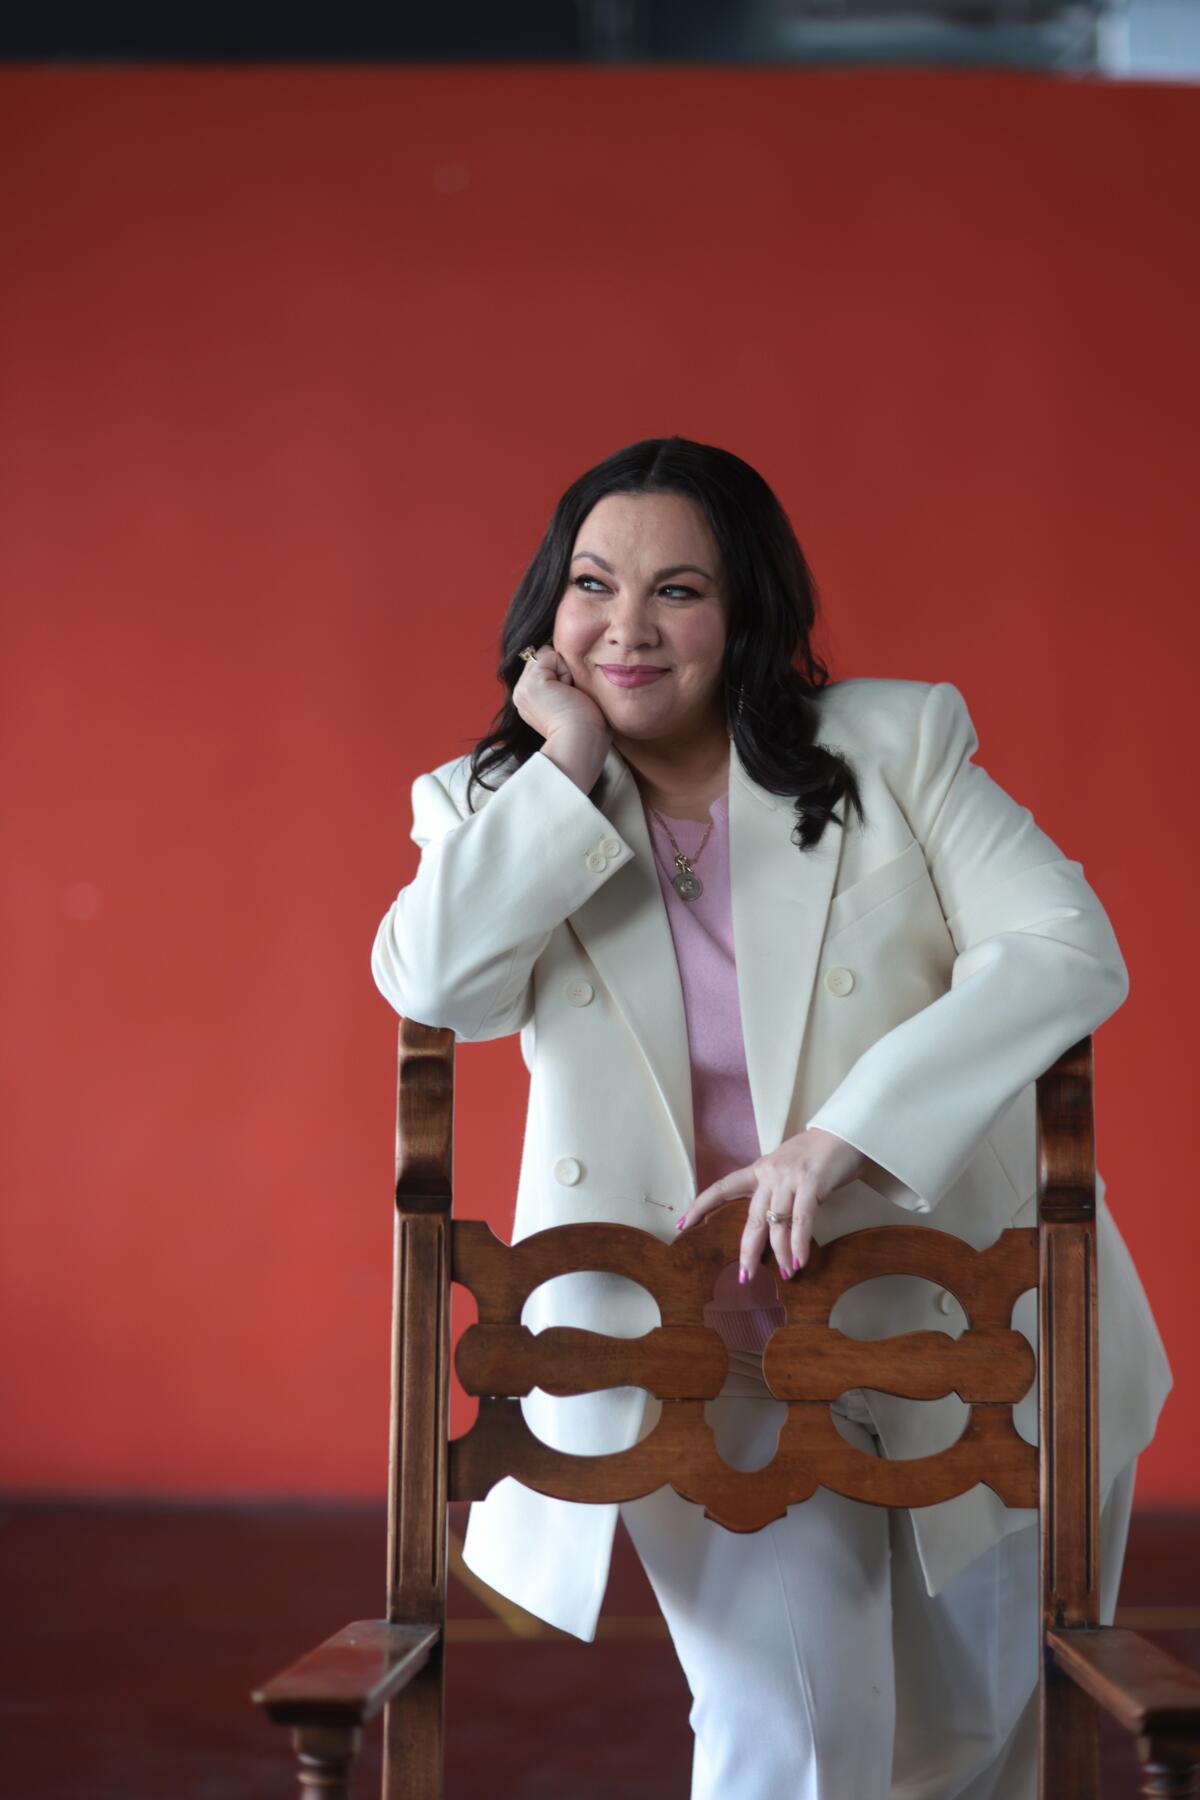 A smiling woman in a white suit leans against the back of a chair